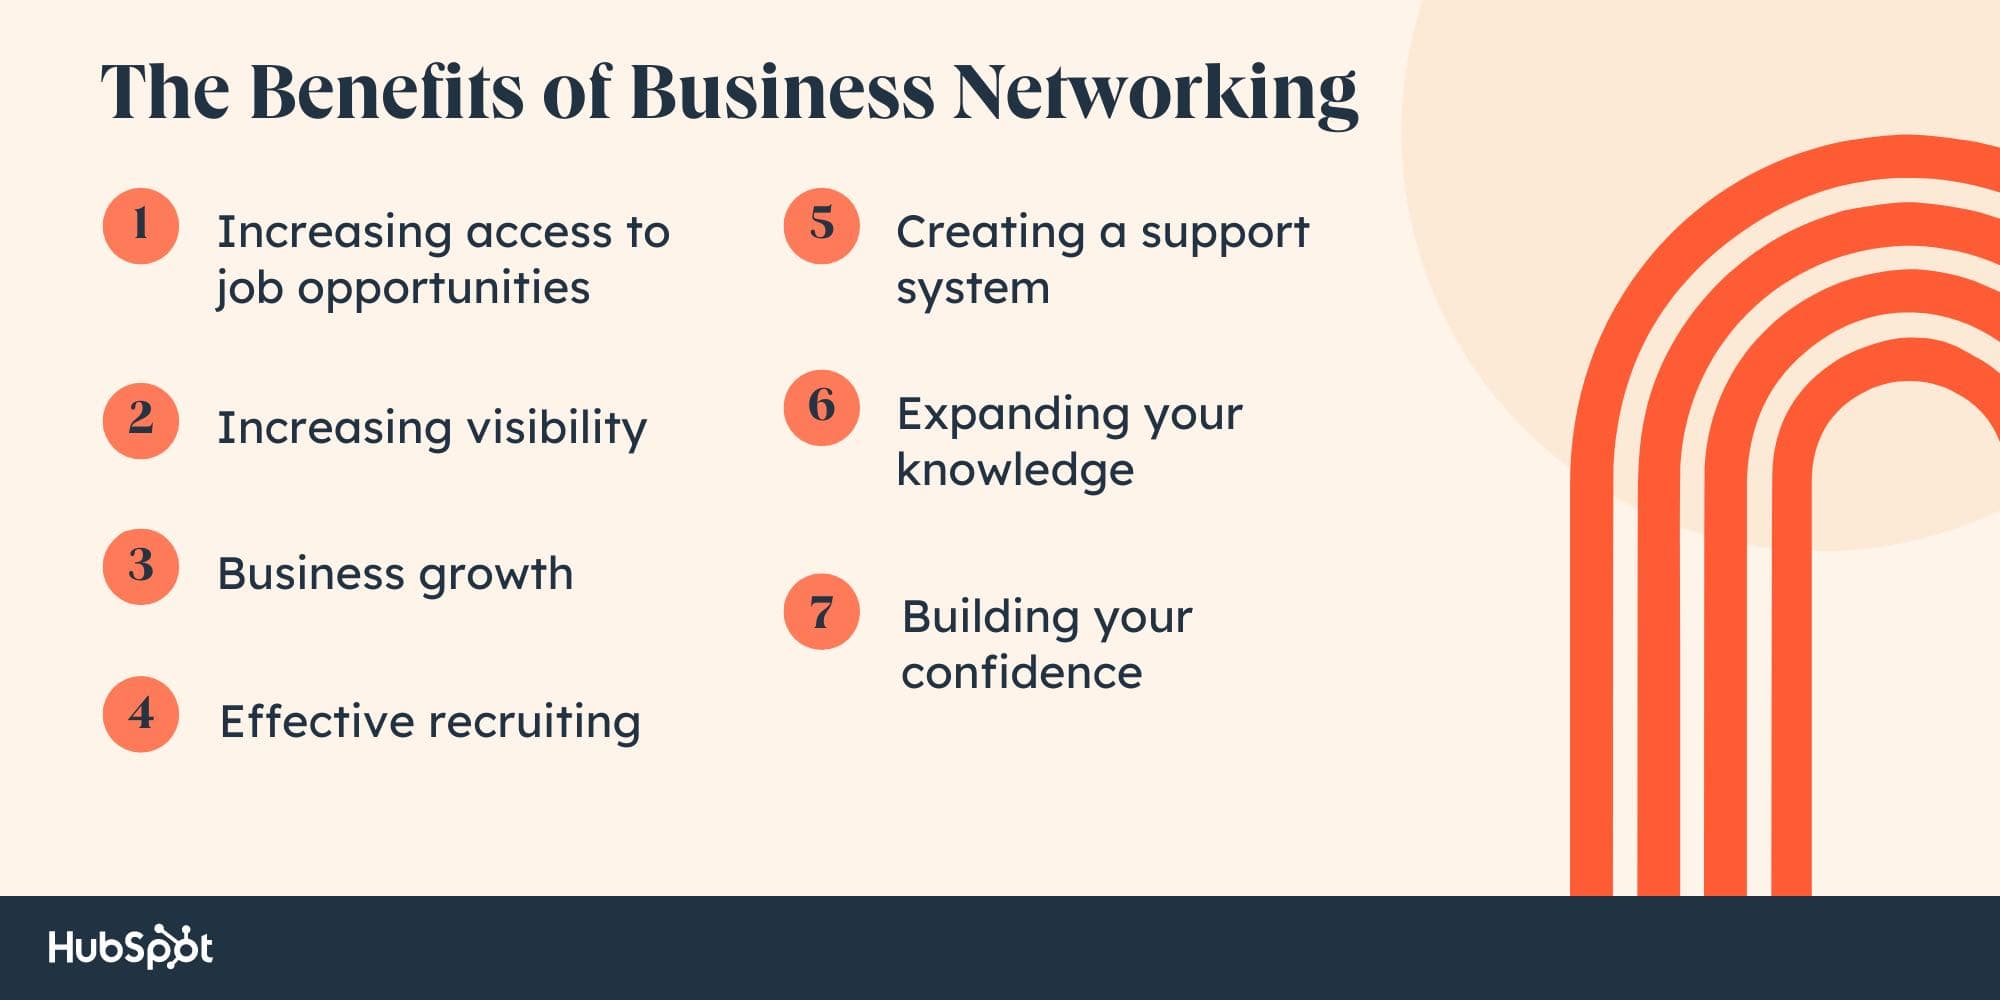 The benefits of business networking: increasing access to jobs, increasing visibility, growing your business, effective recruiting, creating a support system, expanding your knowledge, building your confidence